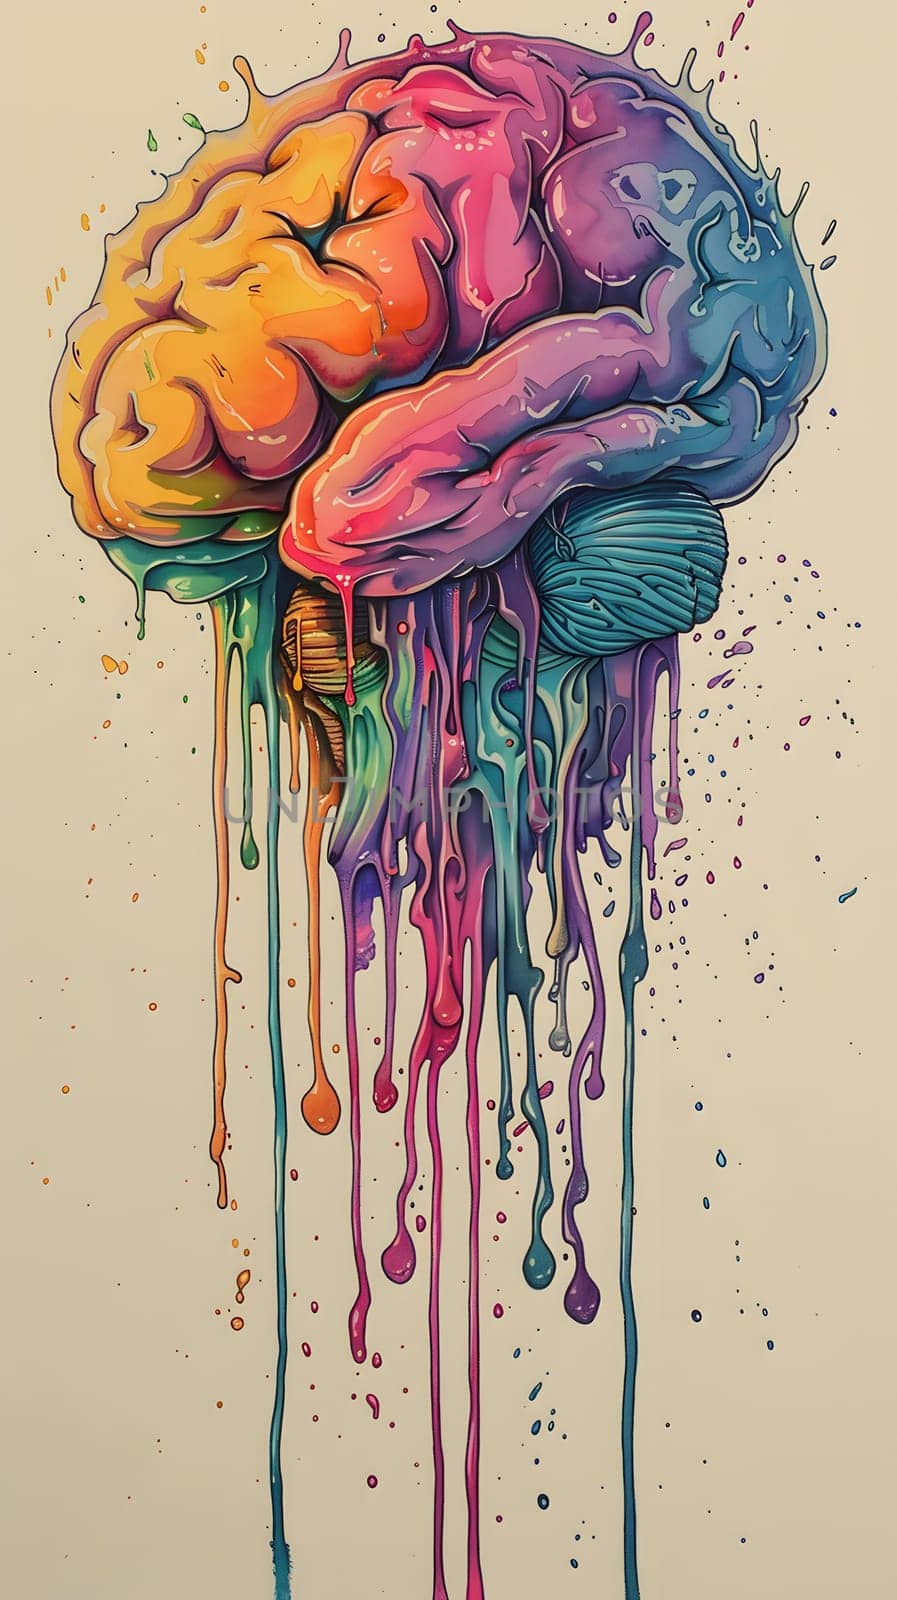 Brain painting with colorful paint drips in shades of purple, pink, and magenta by Nadtochiy